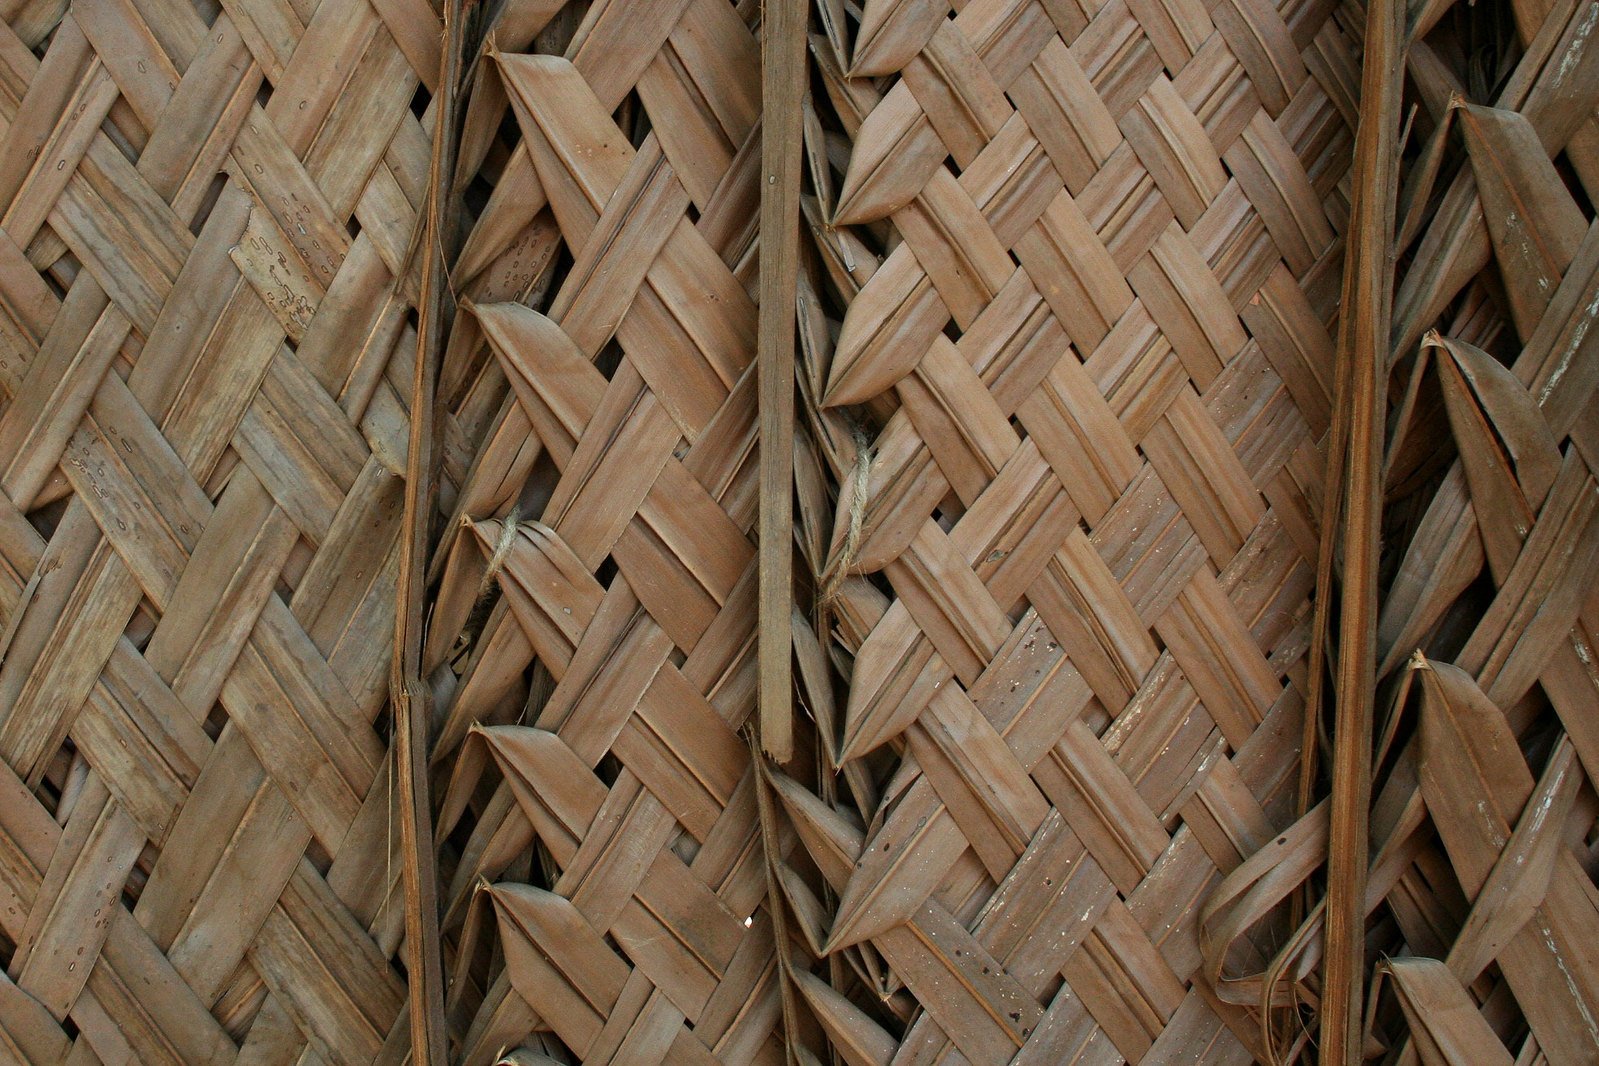 close up image of a brown woven fabric